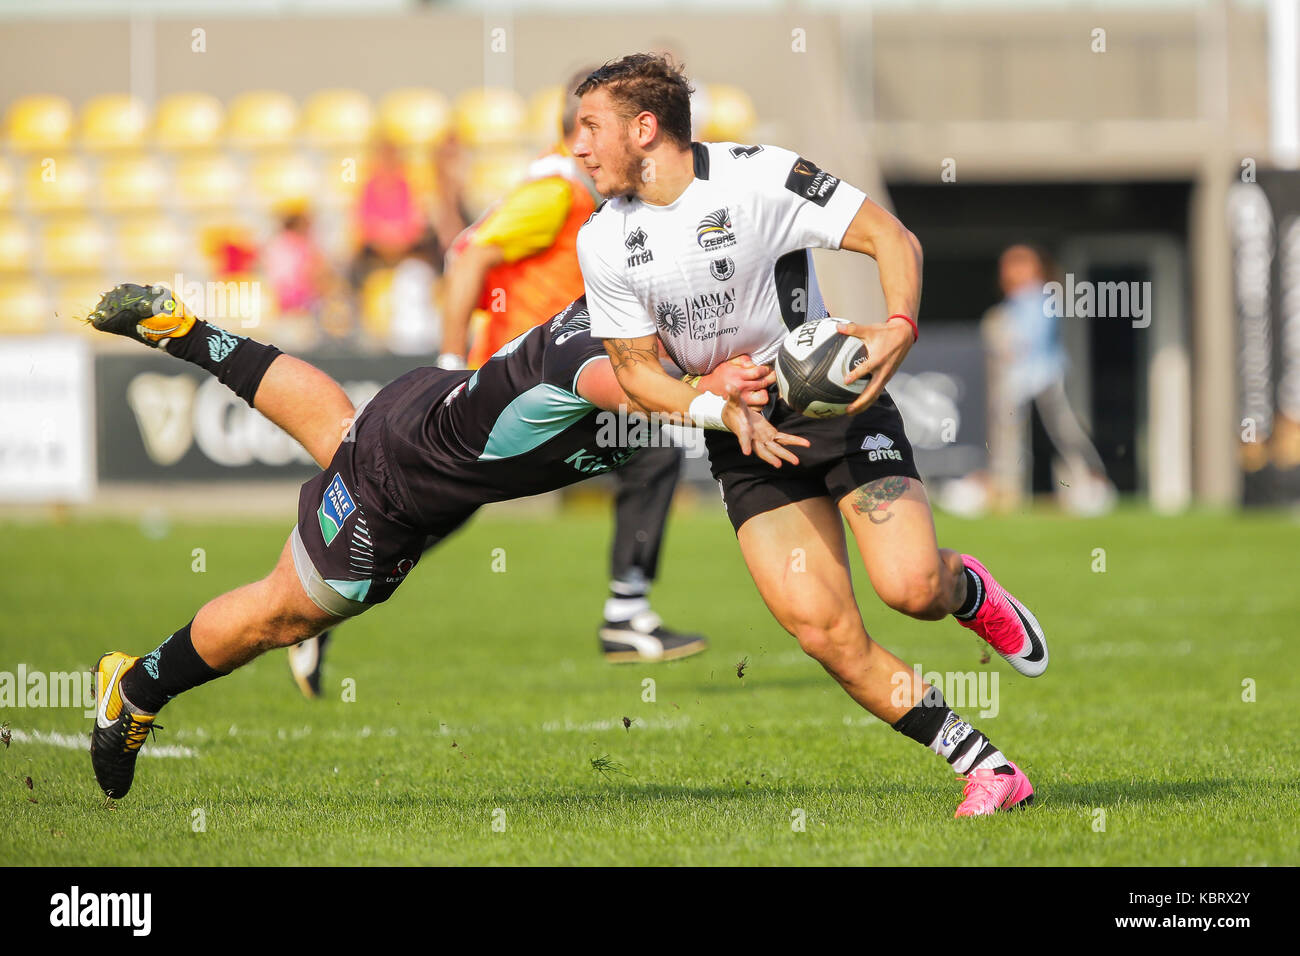 Parma, Italy. 30th September 2017. Zebre's full back Matteo Minozzi avoids a tackle with a side step in the match against Ulster in Guinness PRO14 rugby championship. Massimiliano Carnabuci/Alamy Live News Stock Photo